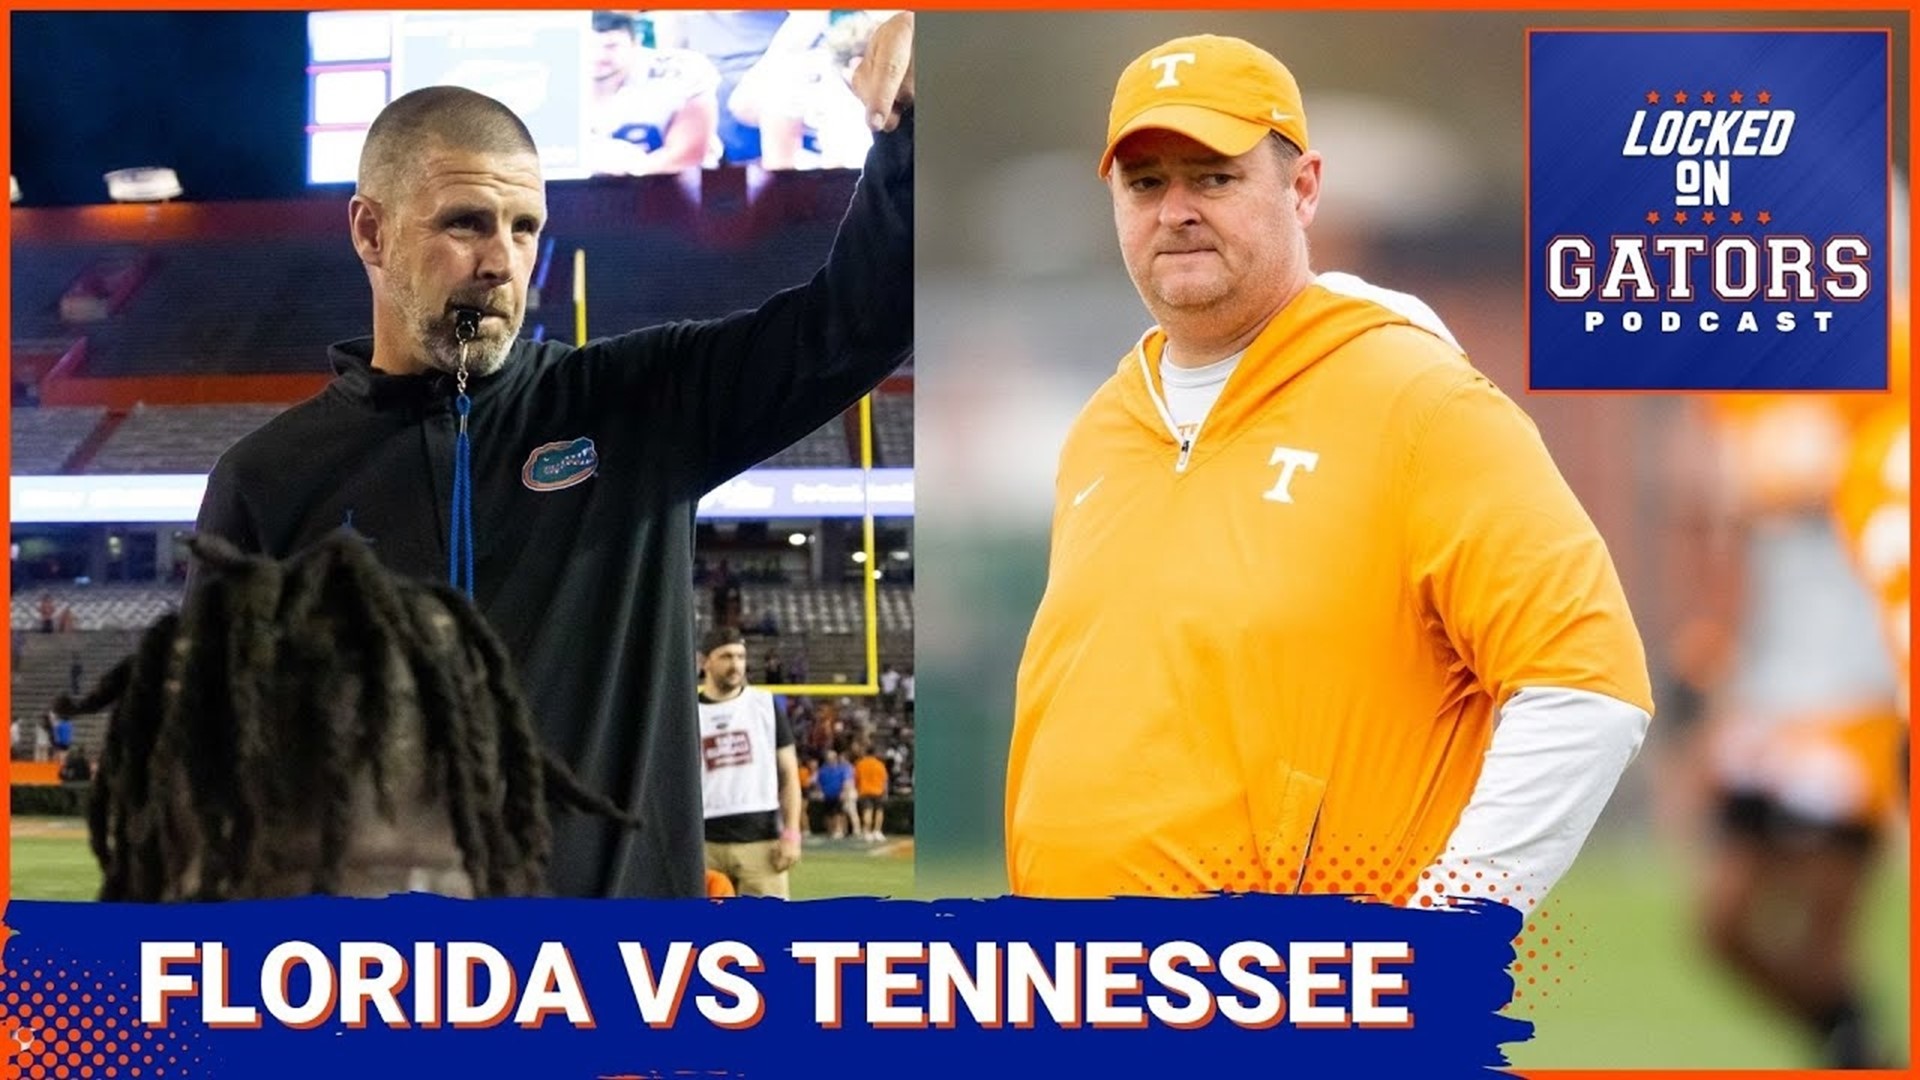 The Florida Gators football team is entering it's second season under head coach Billy Napier and will open SEC play against the Tennessee Volunteers